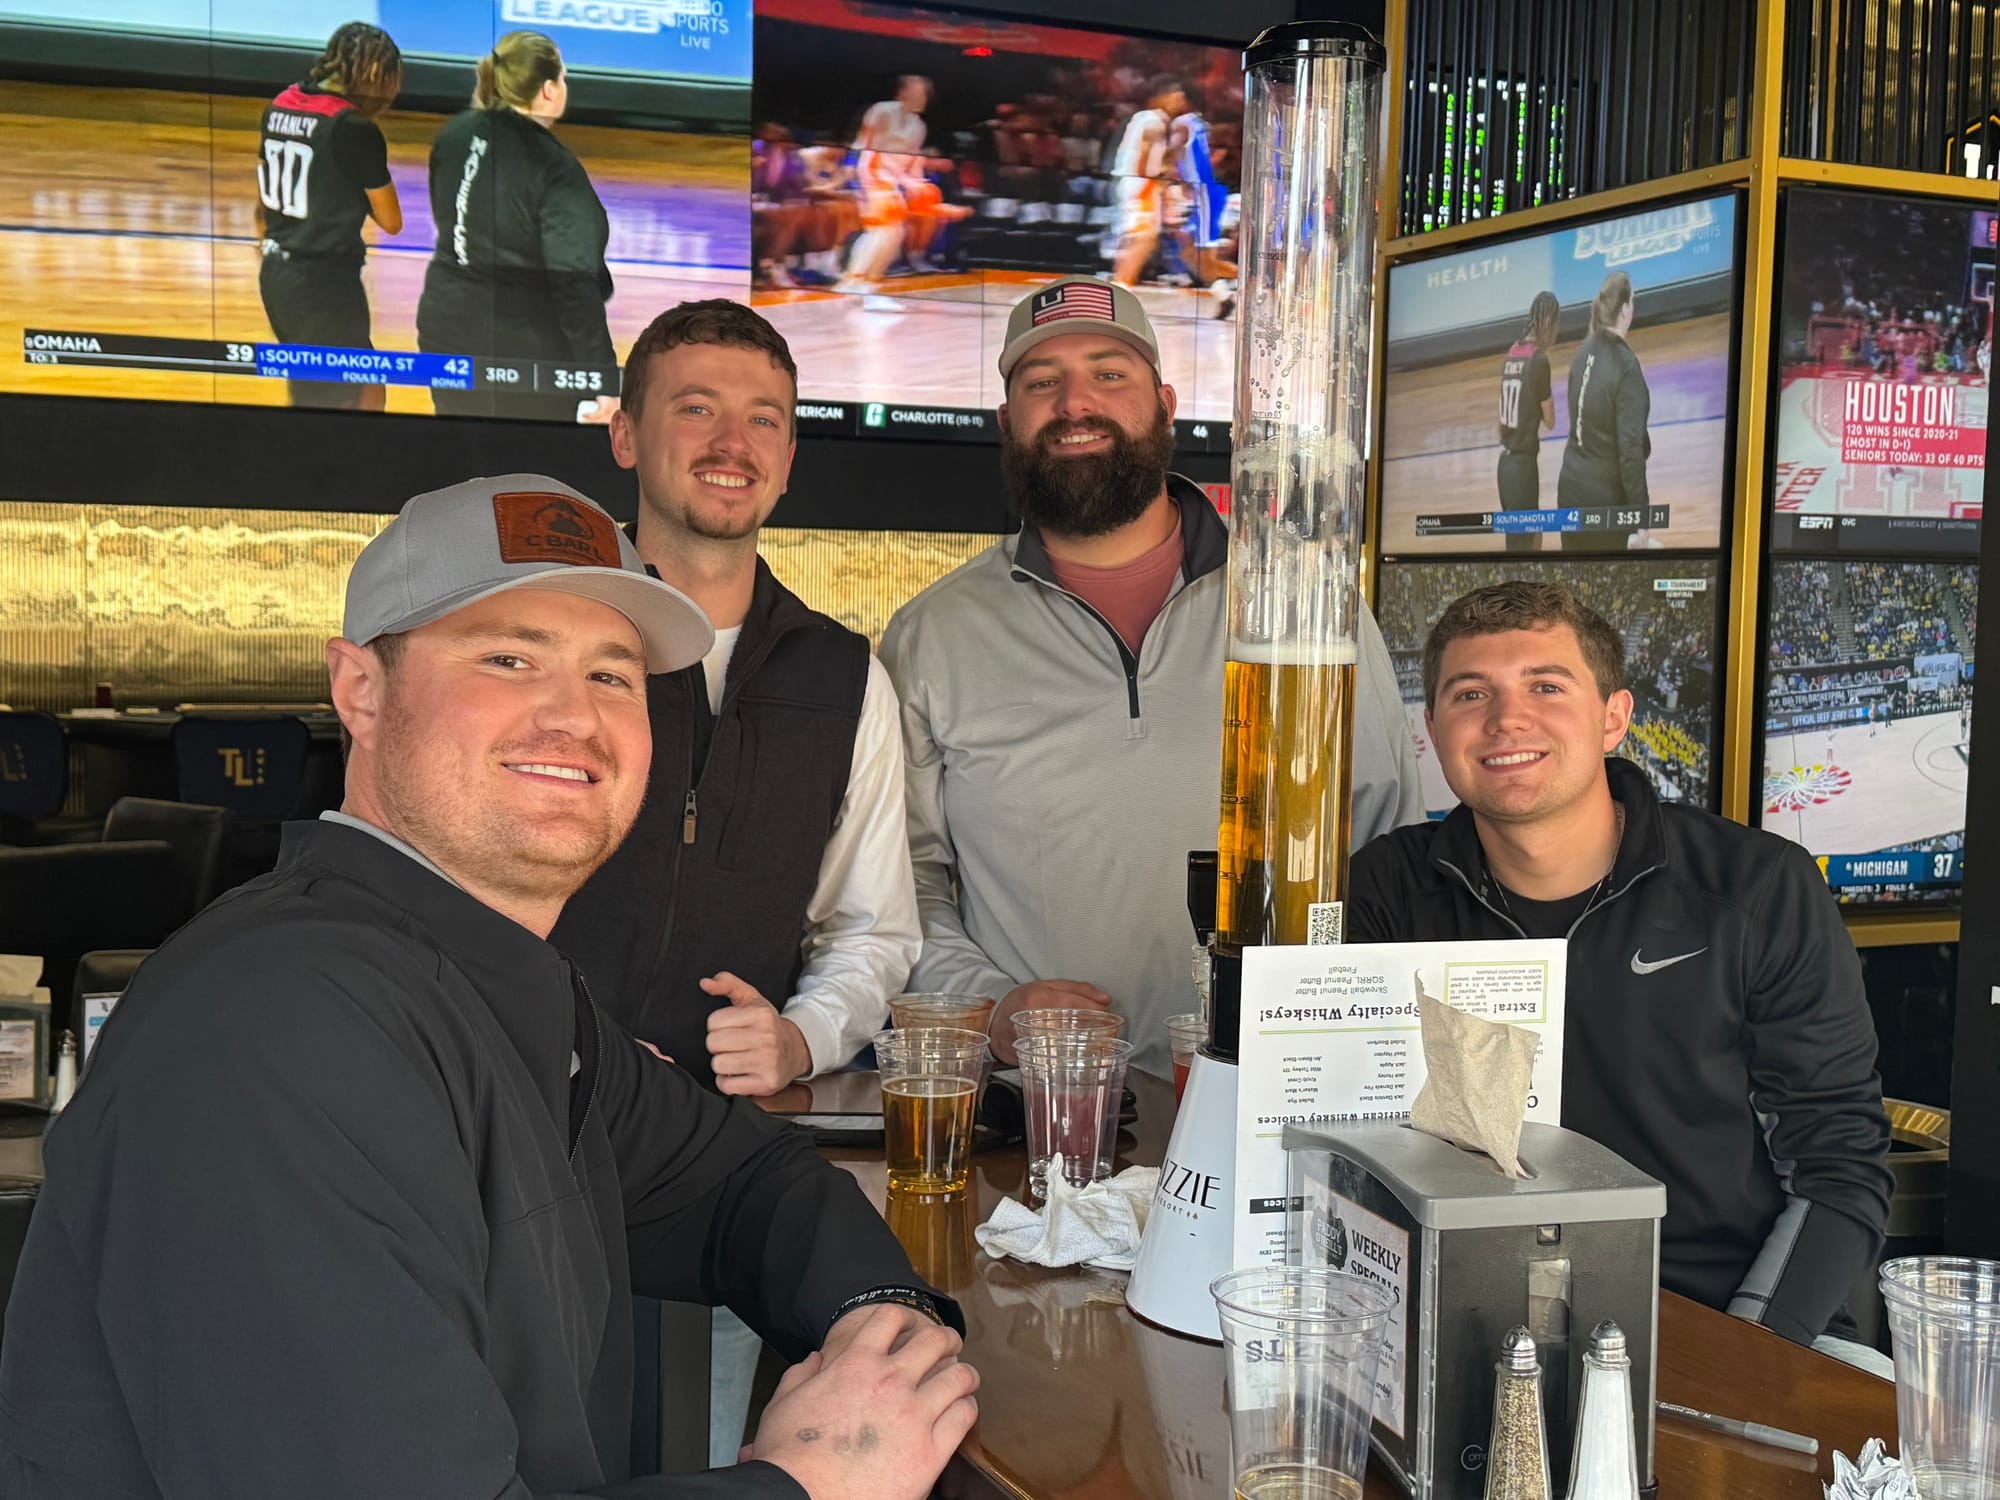 Four men from Colorado pose for a photo at a sports betting site in Deadwood, South Dakota.